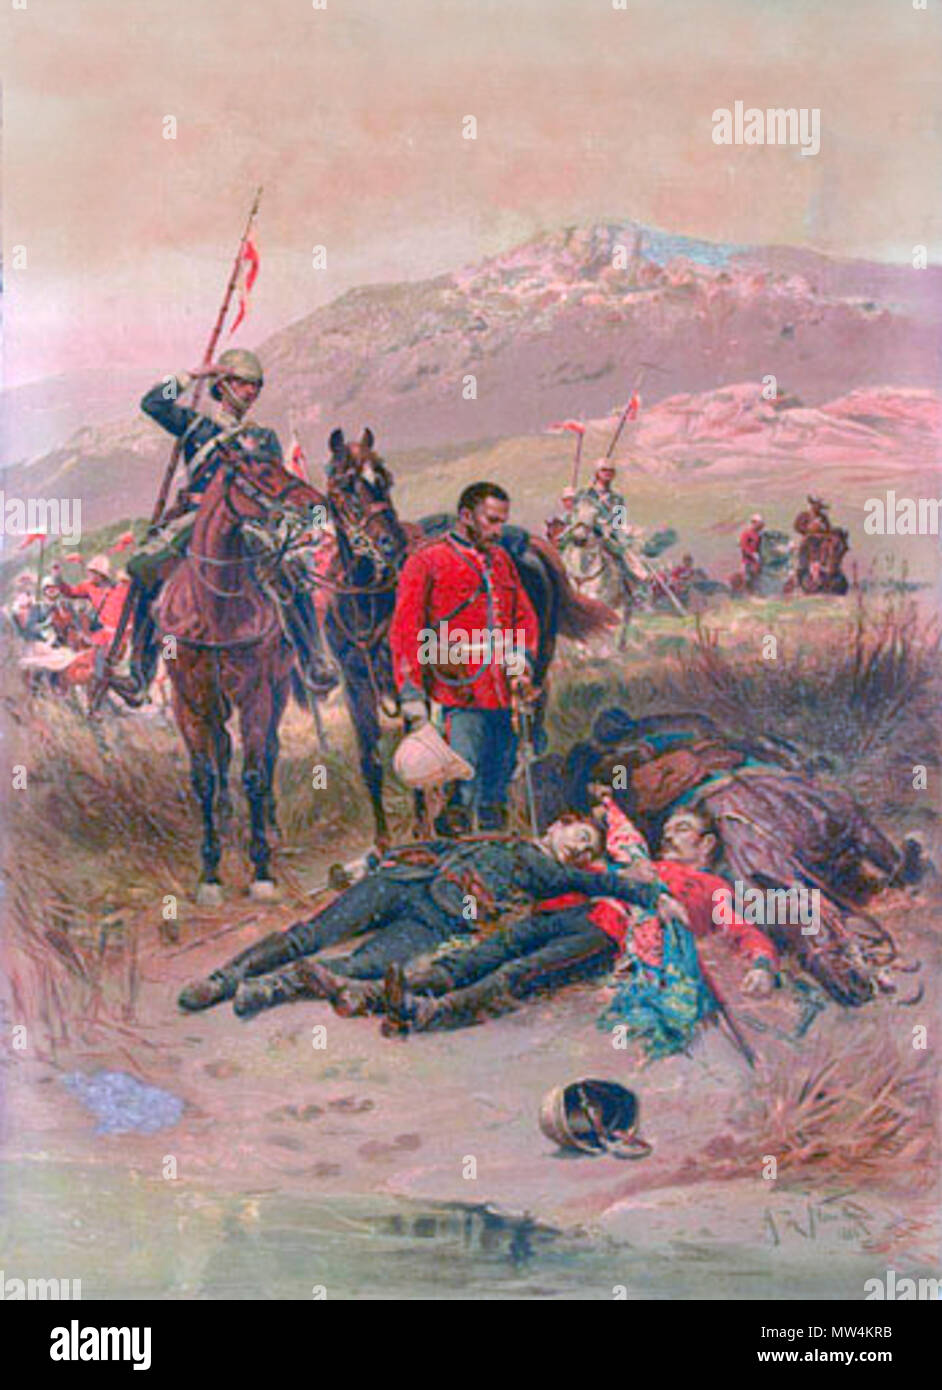 . English: Prev - 1 of 1 results - Next » 'Last Sleep of the Brave', Isandlwana, Zulu War, 1879. Oleograph after Alphonse de Neuville, 1881. This work depicts a patrol from the 17th (Duke of Cambridge's Own) Lancers discovering the bodies of Lieutenant Teignmouth Melvill and Lieutenant Nevill Josiah Aylmer Coghill, 24th (2nd Warwickshire) Regiment of Foot, who were both killed attempting to save the Queen's Colour of the 1st Battalion at the Battle of Isandlwana on 22 January 1879. The depiction of the 17th Lancers is however anachronistic as when the bodies were retrieved the lancers had yet  Stock Photo